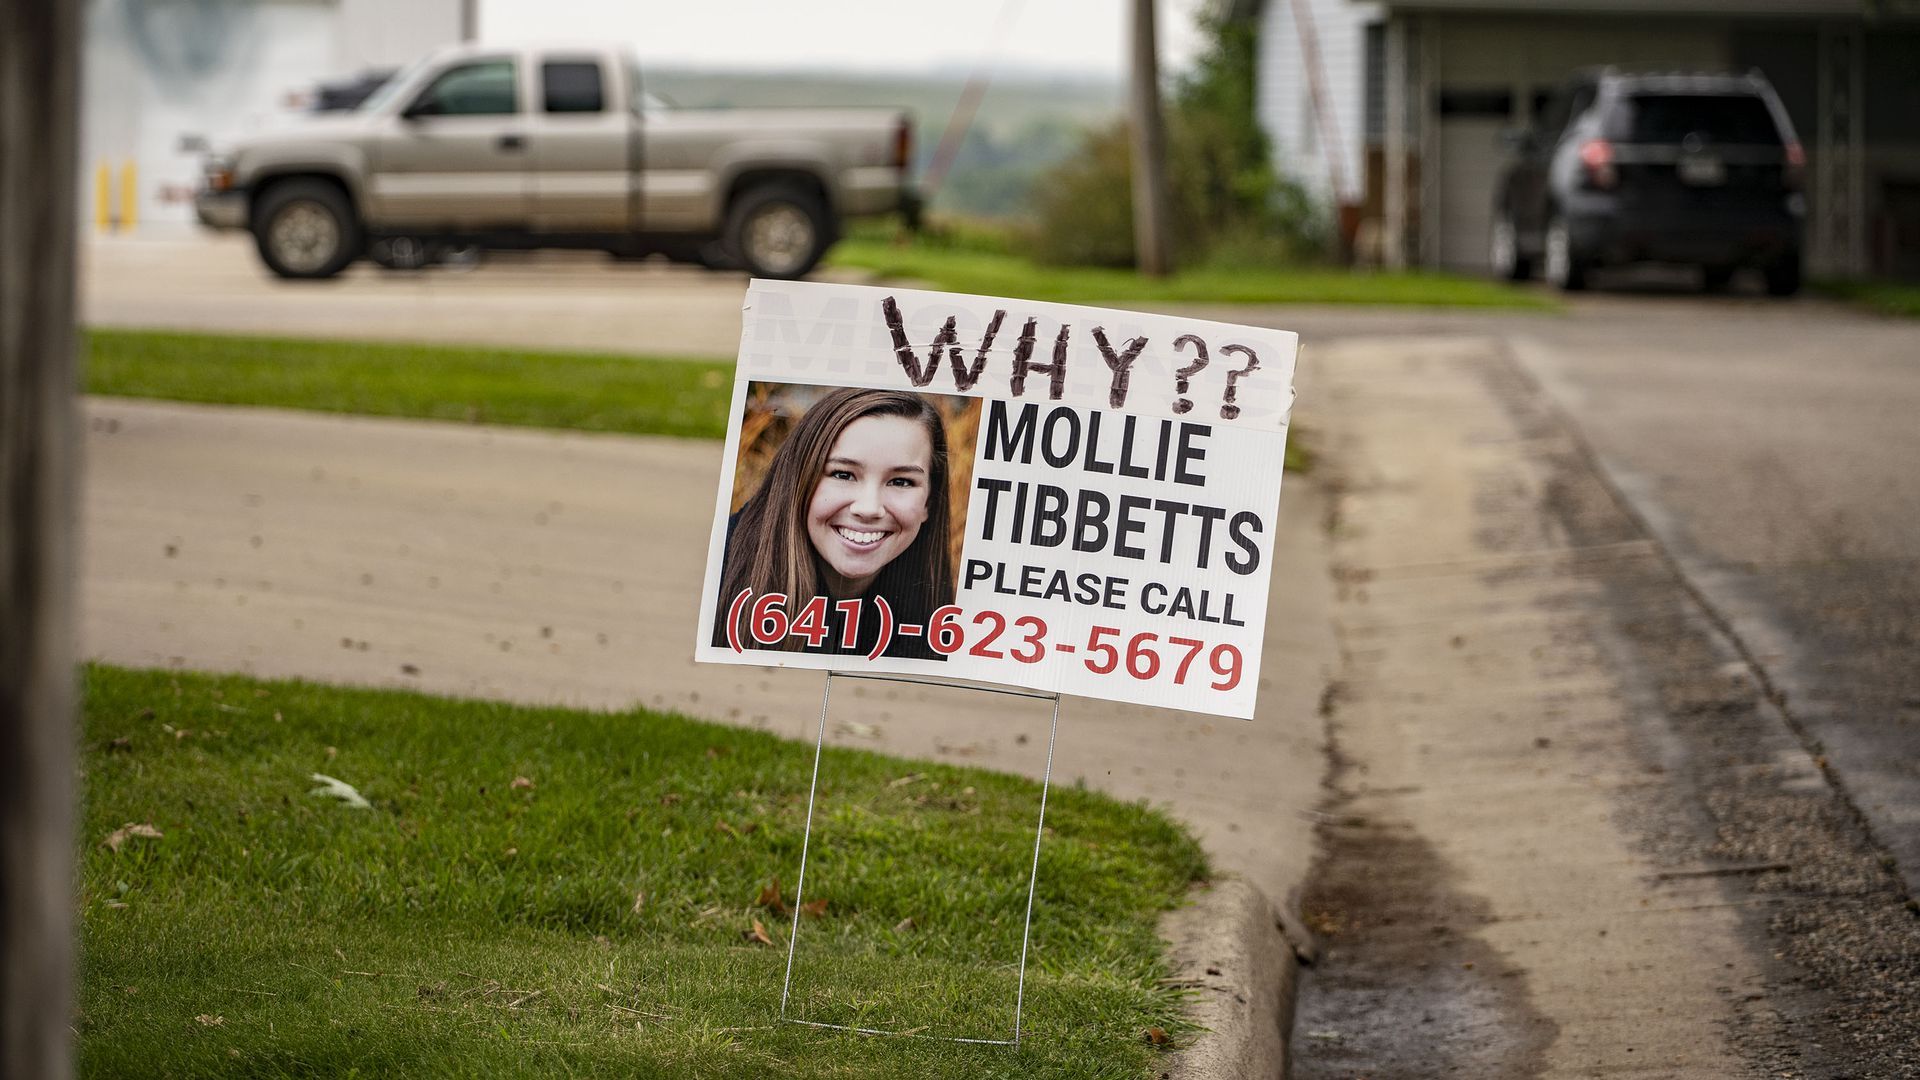 A lawn sign asking people to call a phone number with information about Mollie Tibbetts.